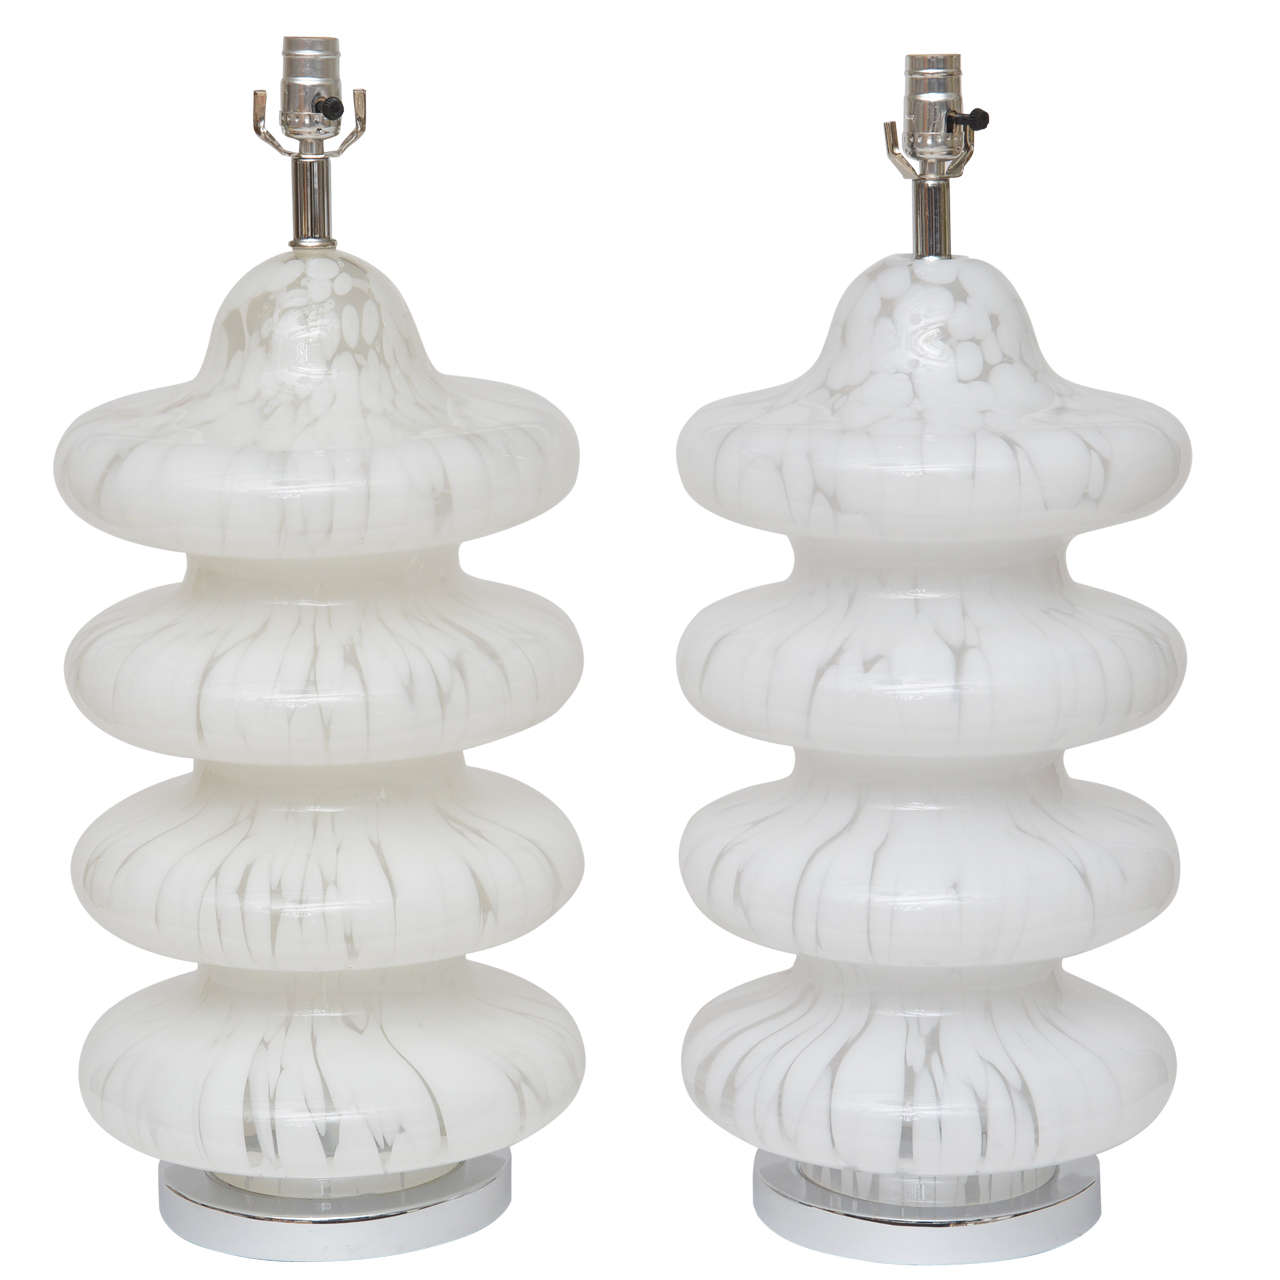 Pair of Large-Scale Murano Glass Lamps